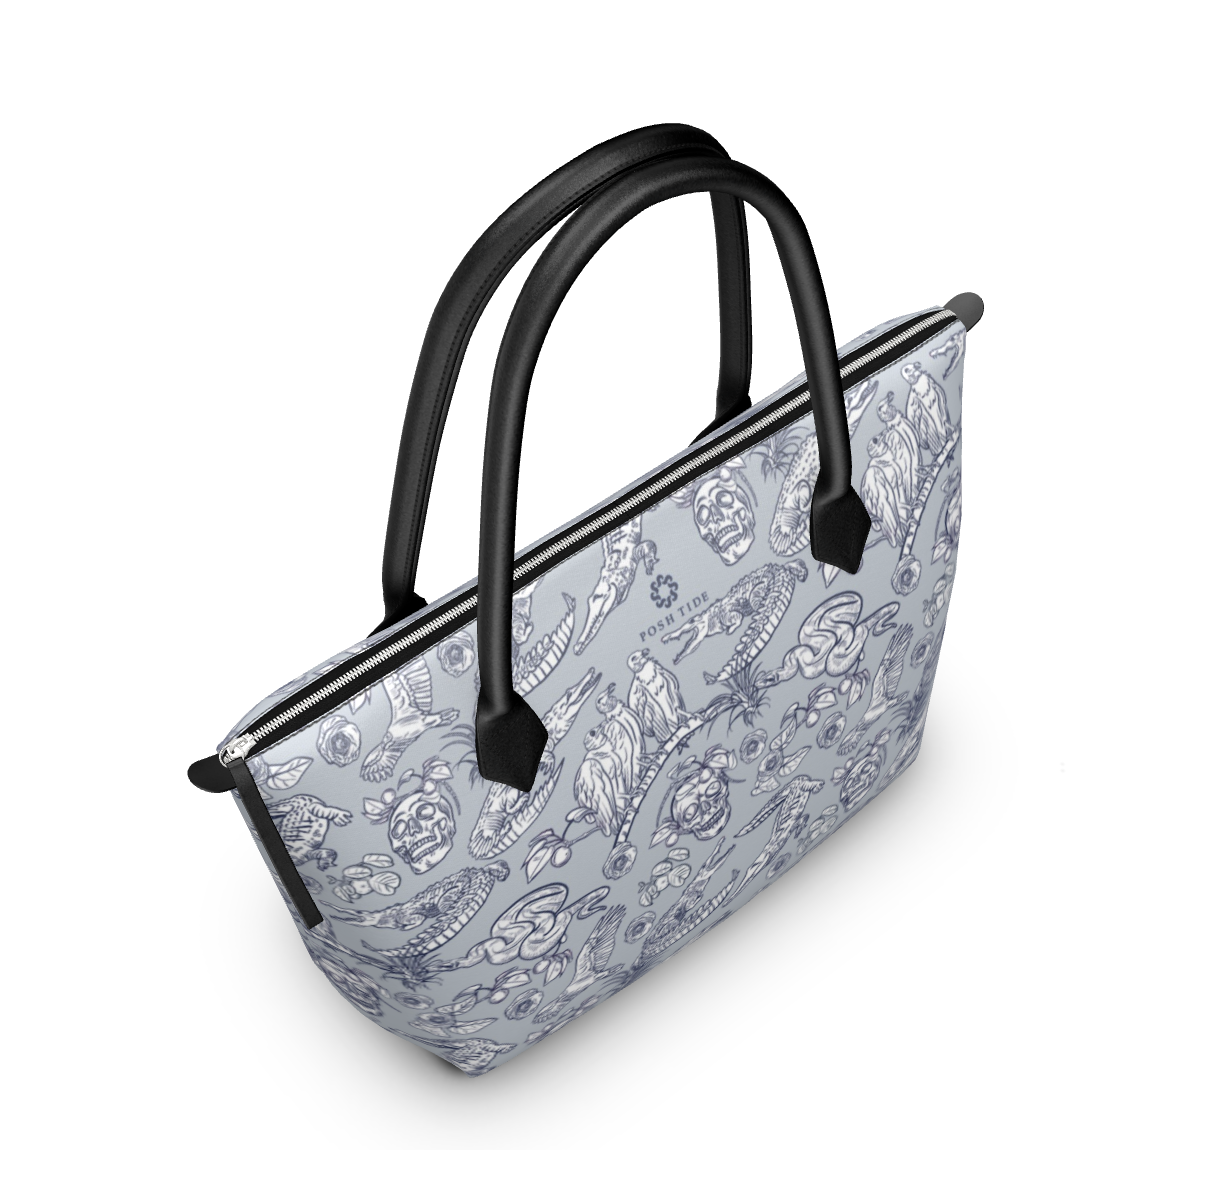 Only in Florida Zip Top Tote - Posh Tide